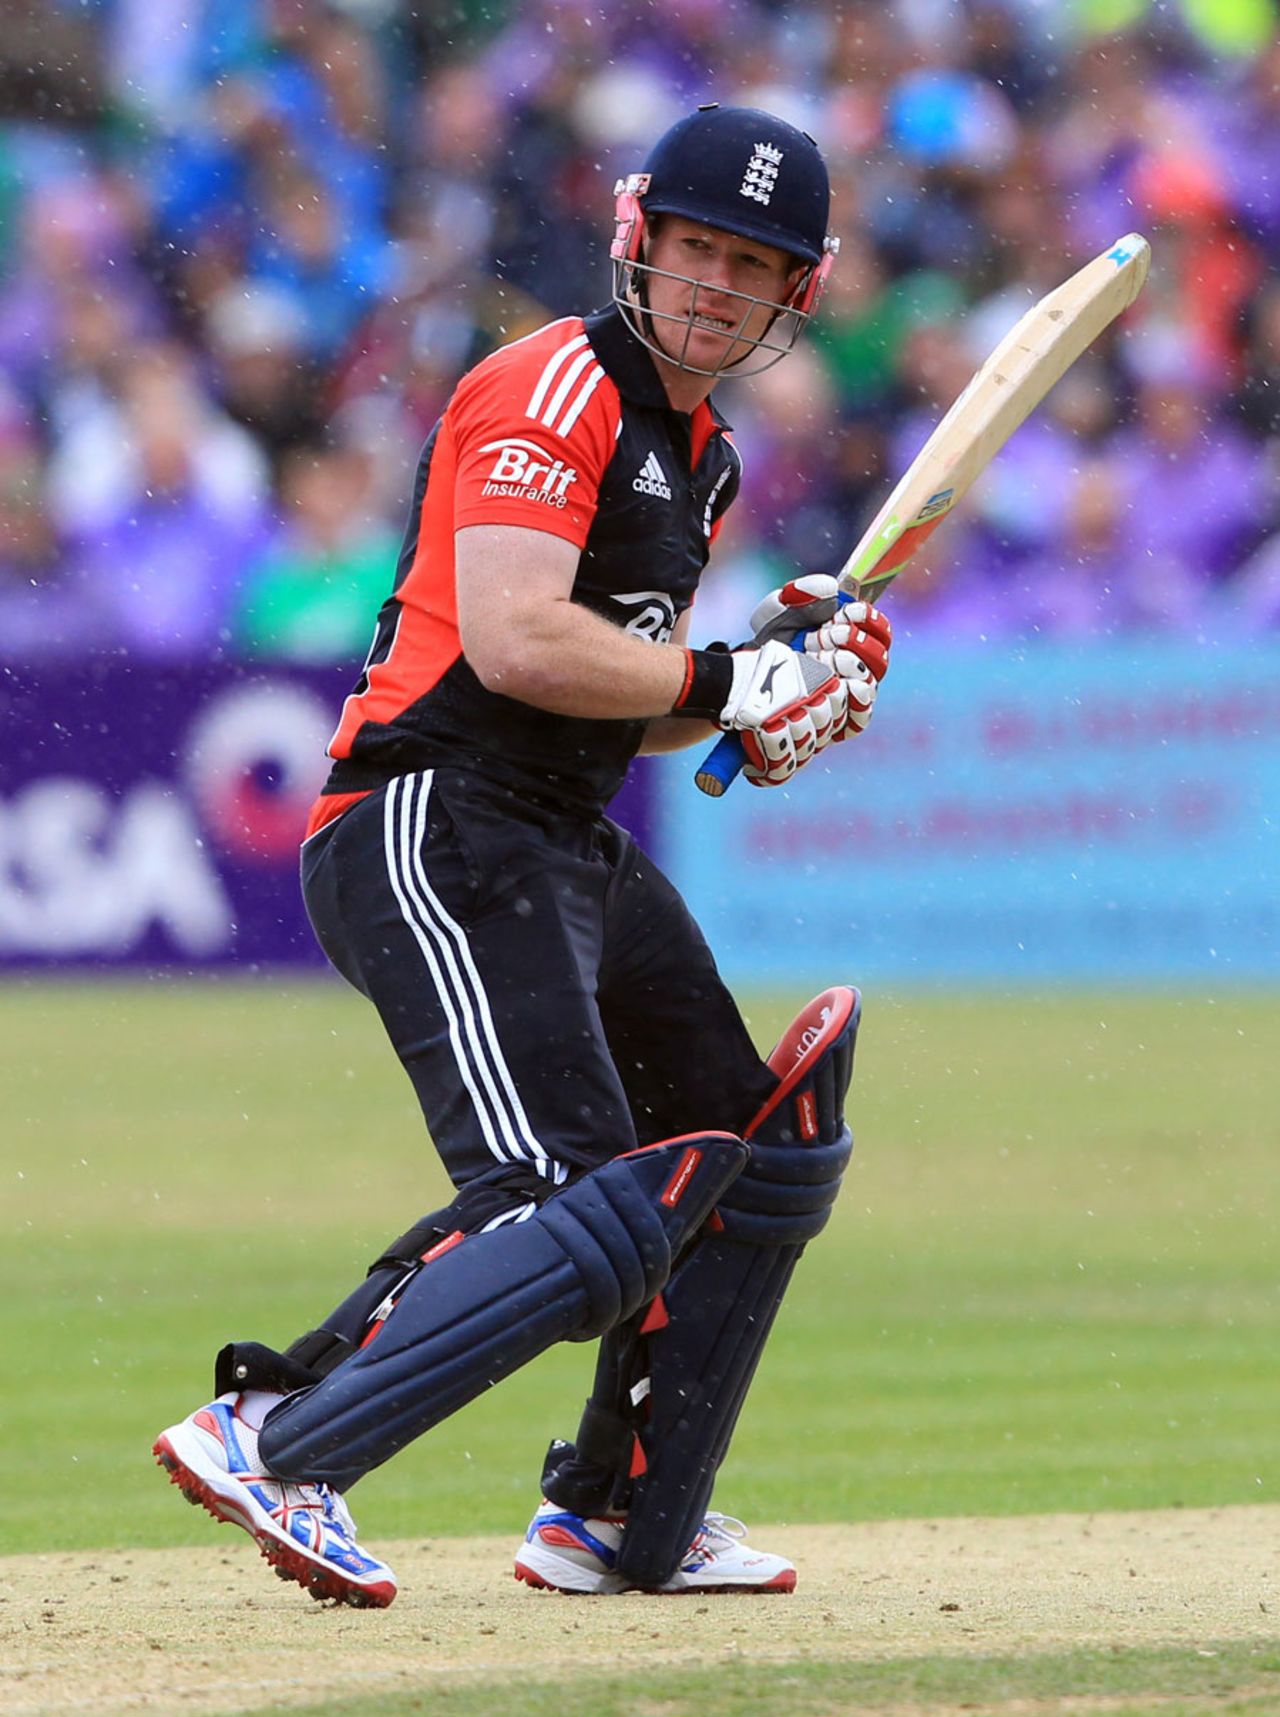 Eoin Morgan made his England captaincy debut against his former countrymen, Ireland v England, only ODI, Clontarf, August 25, 2011